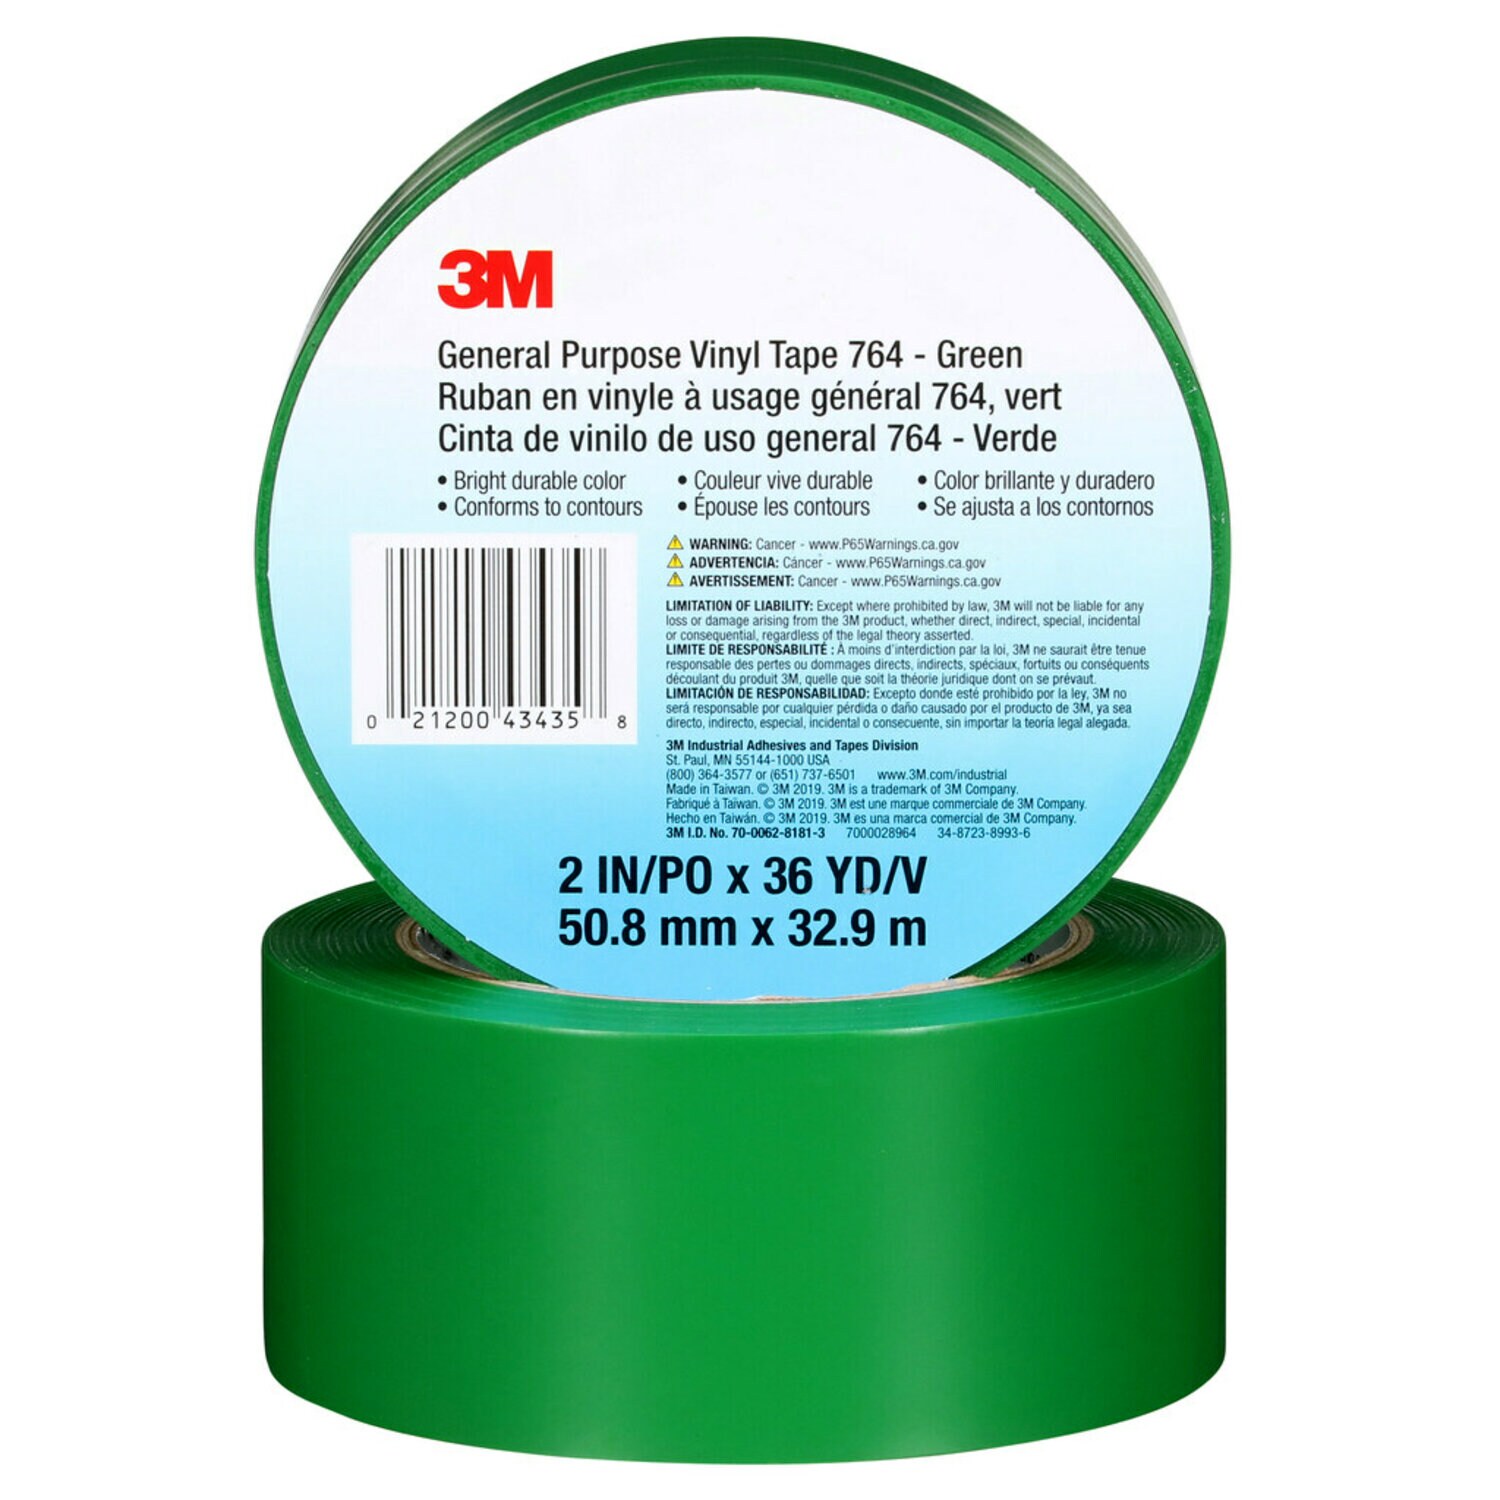 7000028964 - 3M General Purpose Vinyl Tape 764, Green, 2 in x 36 yd, 5 mil, 24 Roll/Case, Individually Wrapped Conveniently Packaged